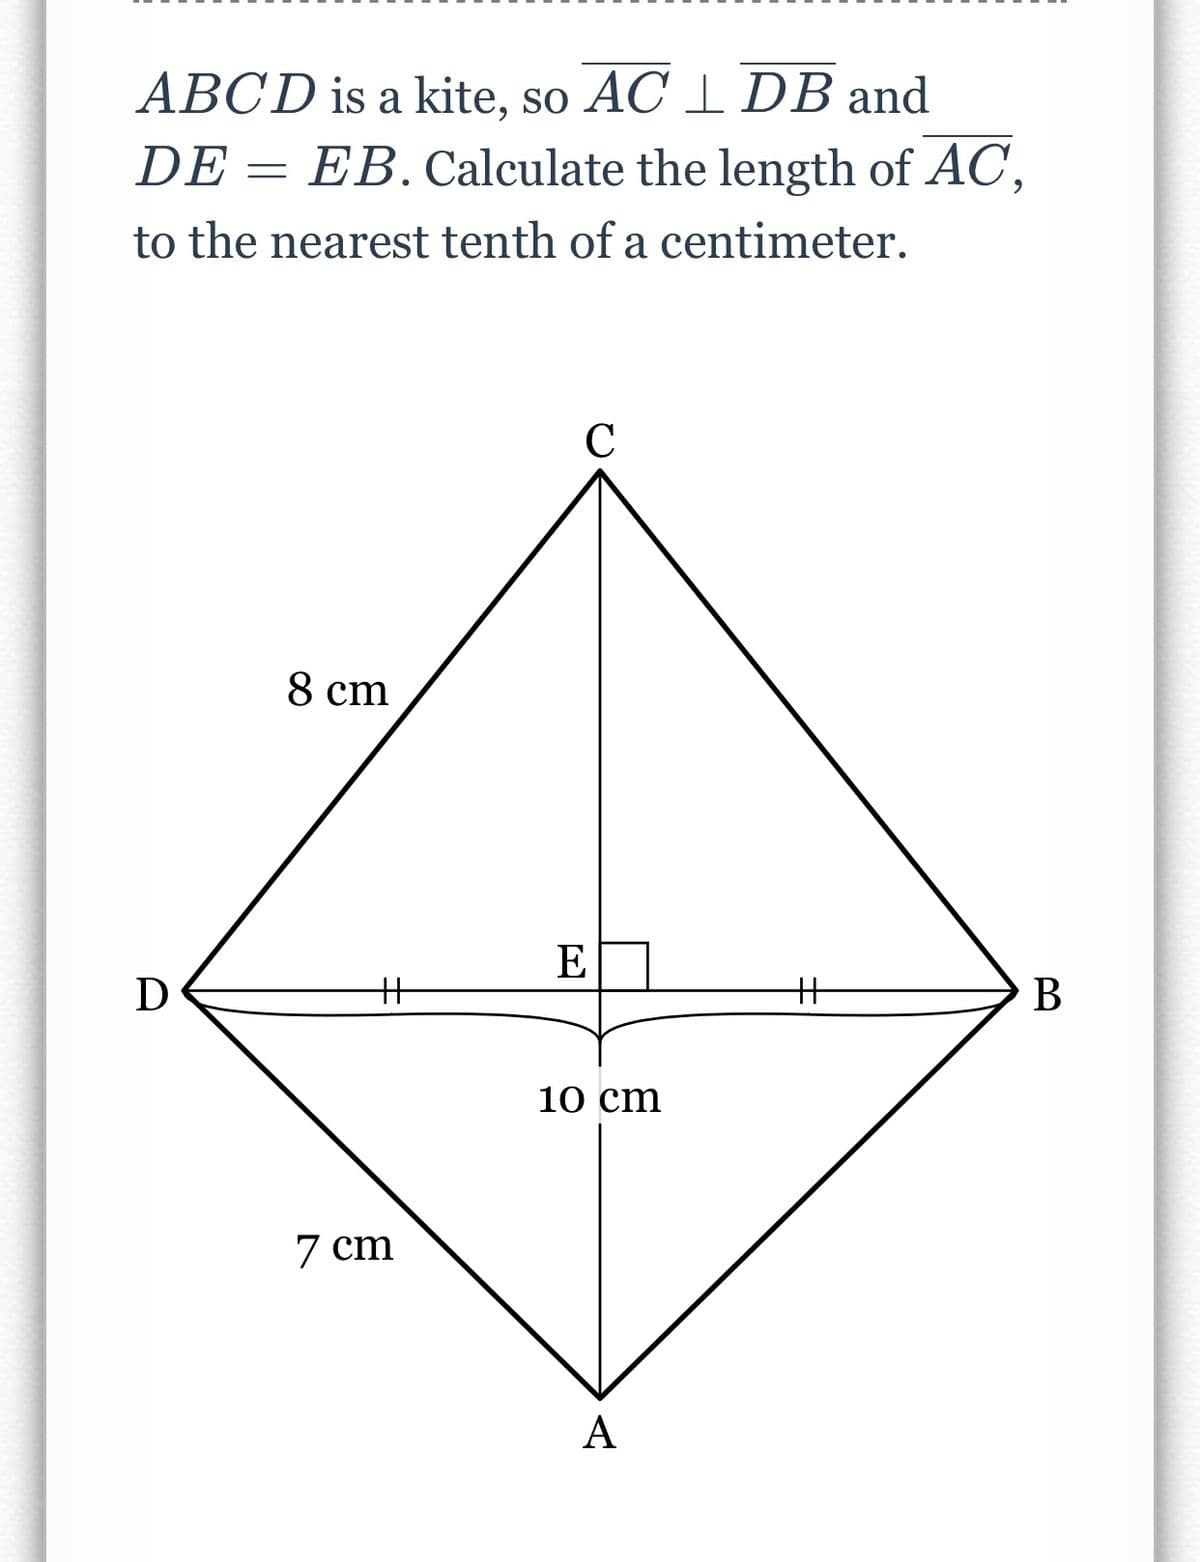 ABCD is a kite, so AC 1 DB and
DE = EB. Calculate the length of AC,
to the nearest tenth of a centimeter.
C
8 cm
E
D
%3
%3
B
10 cm
7 cm
A
